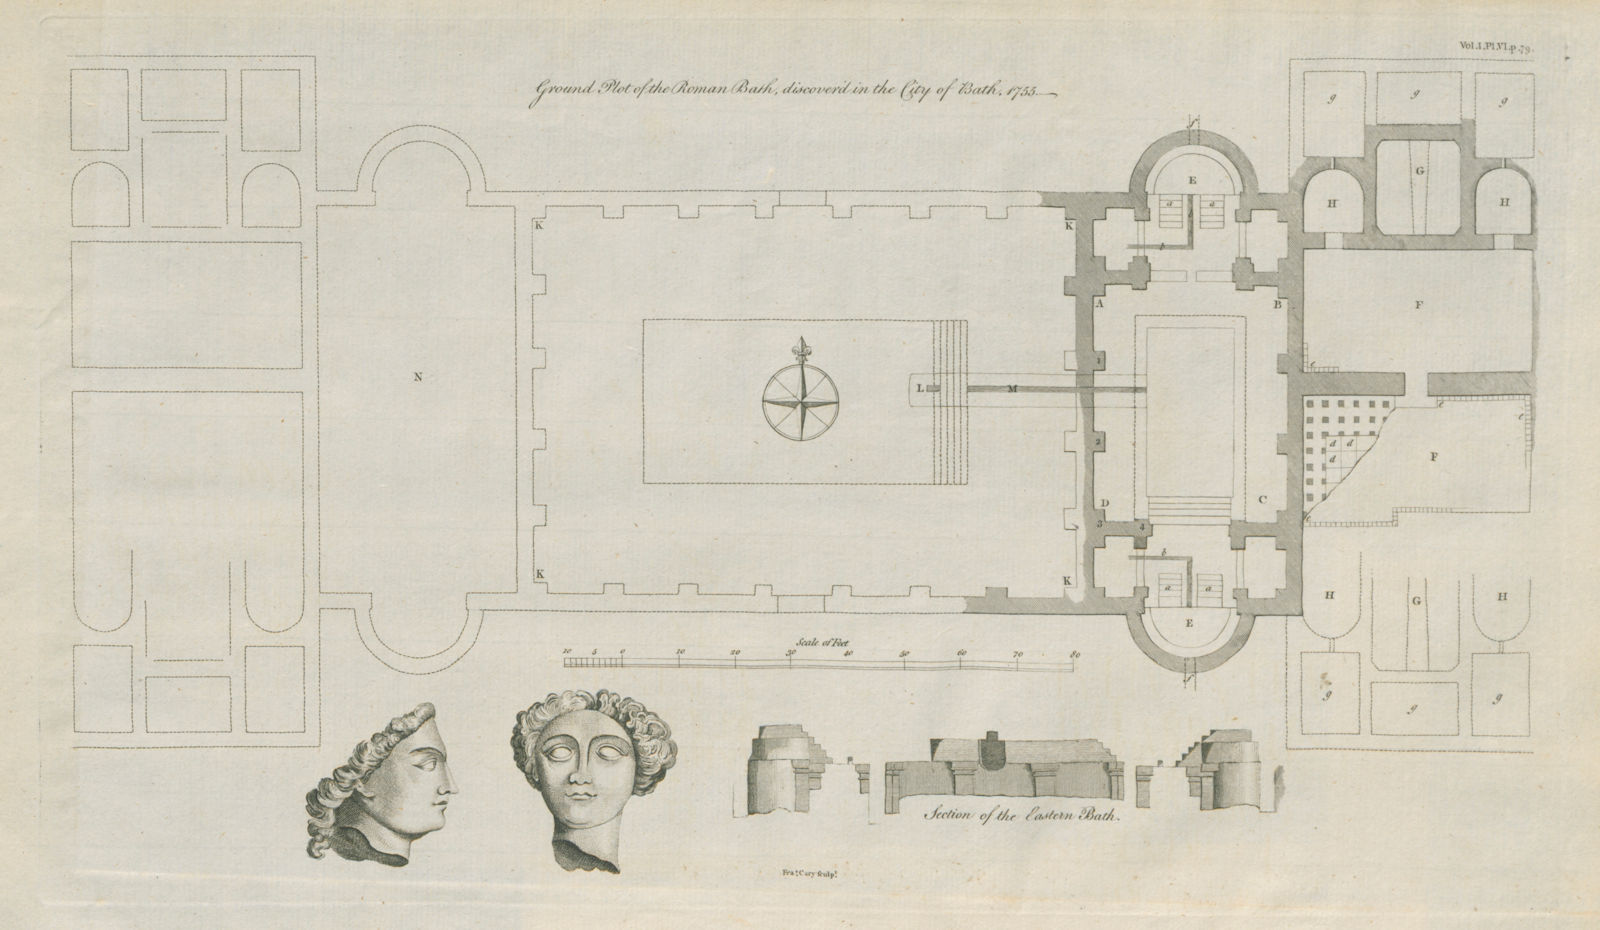 Ground plot of the Roman Bath discover'd in the City of Bath 1755. CARY 1789 map